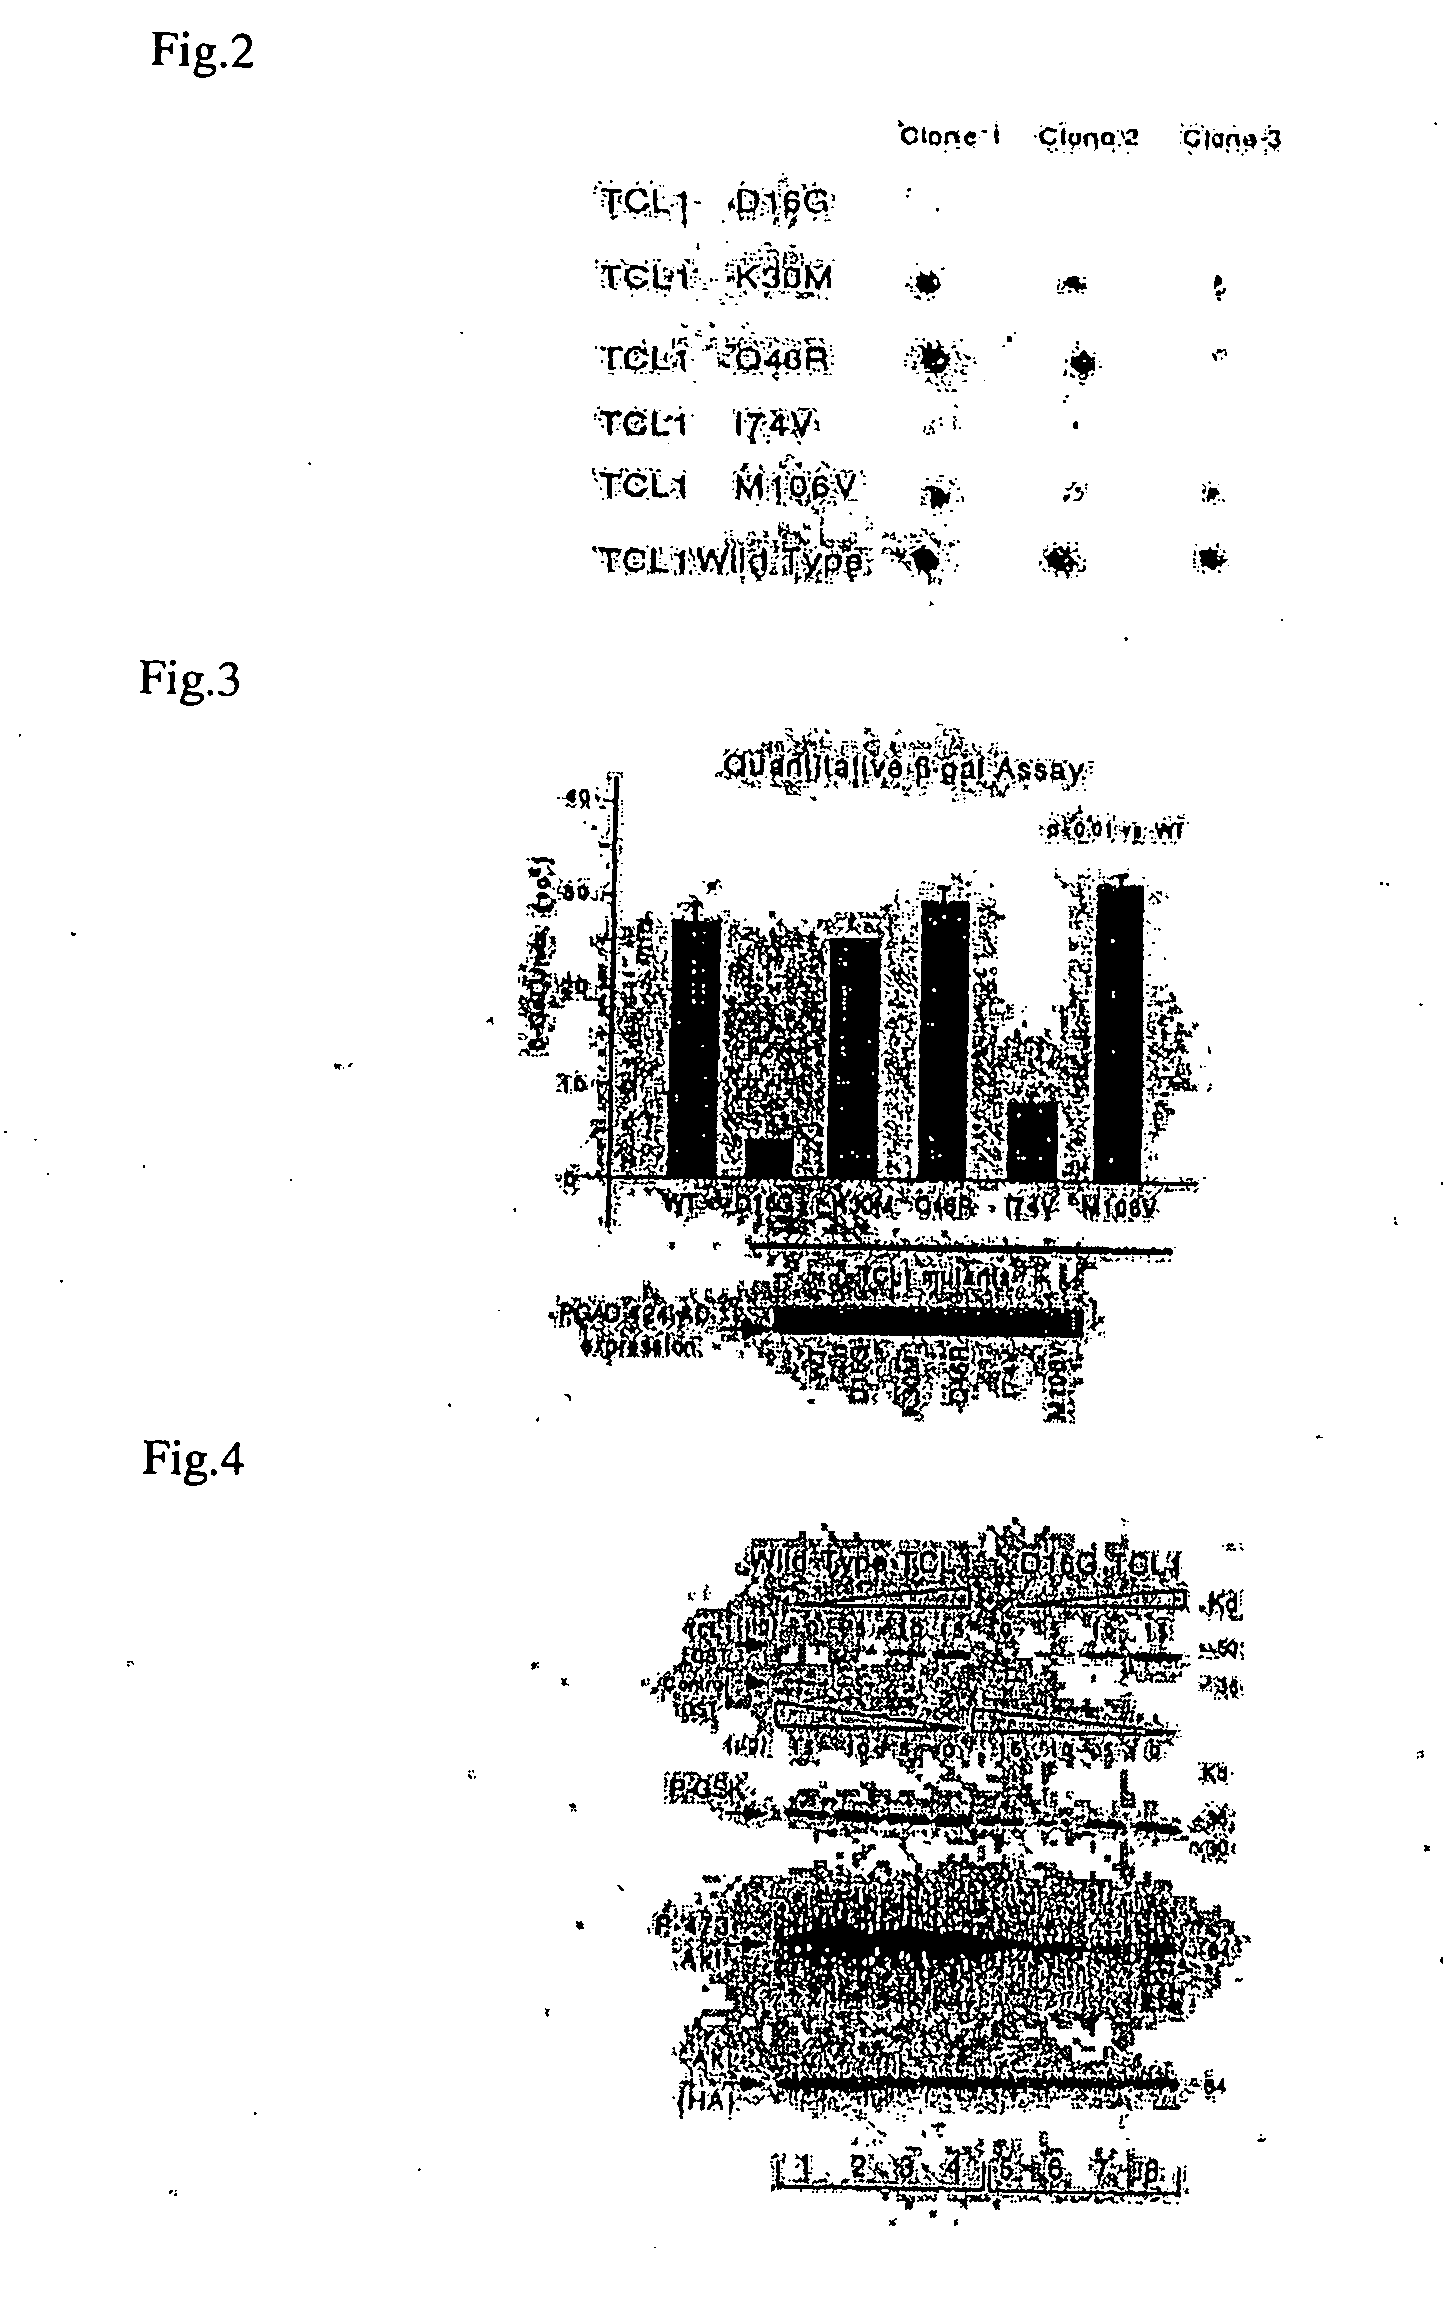 Akt activity specifically inhibiting polypeptide